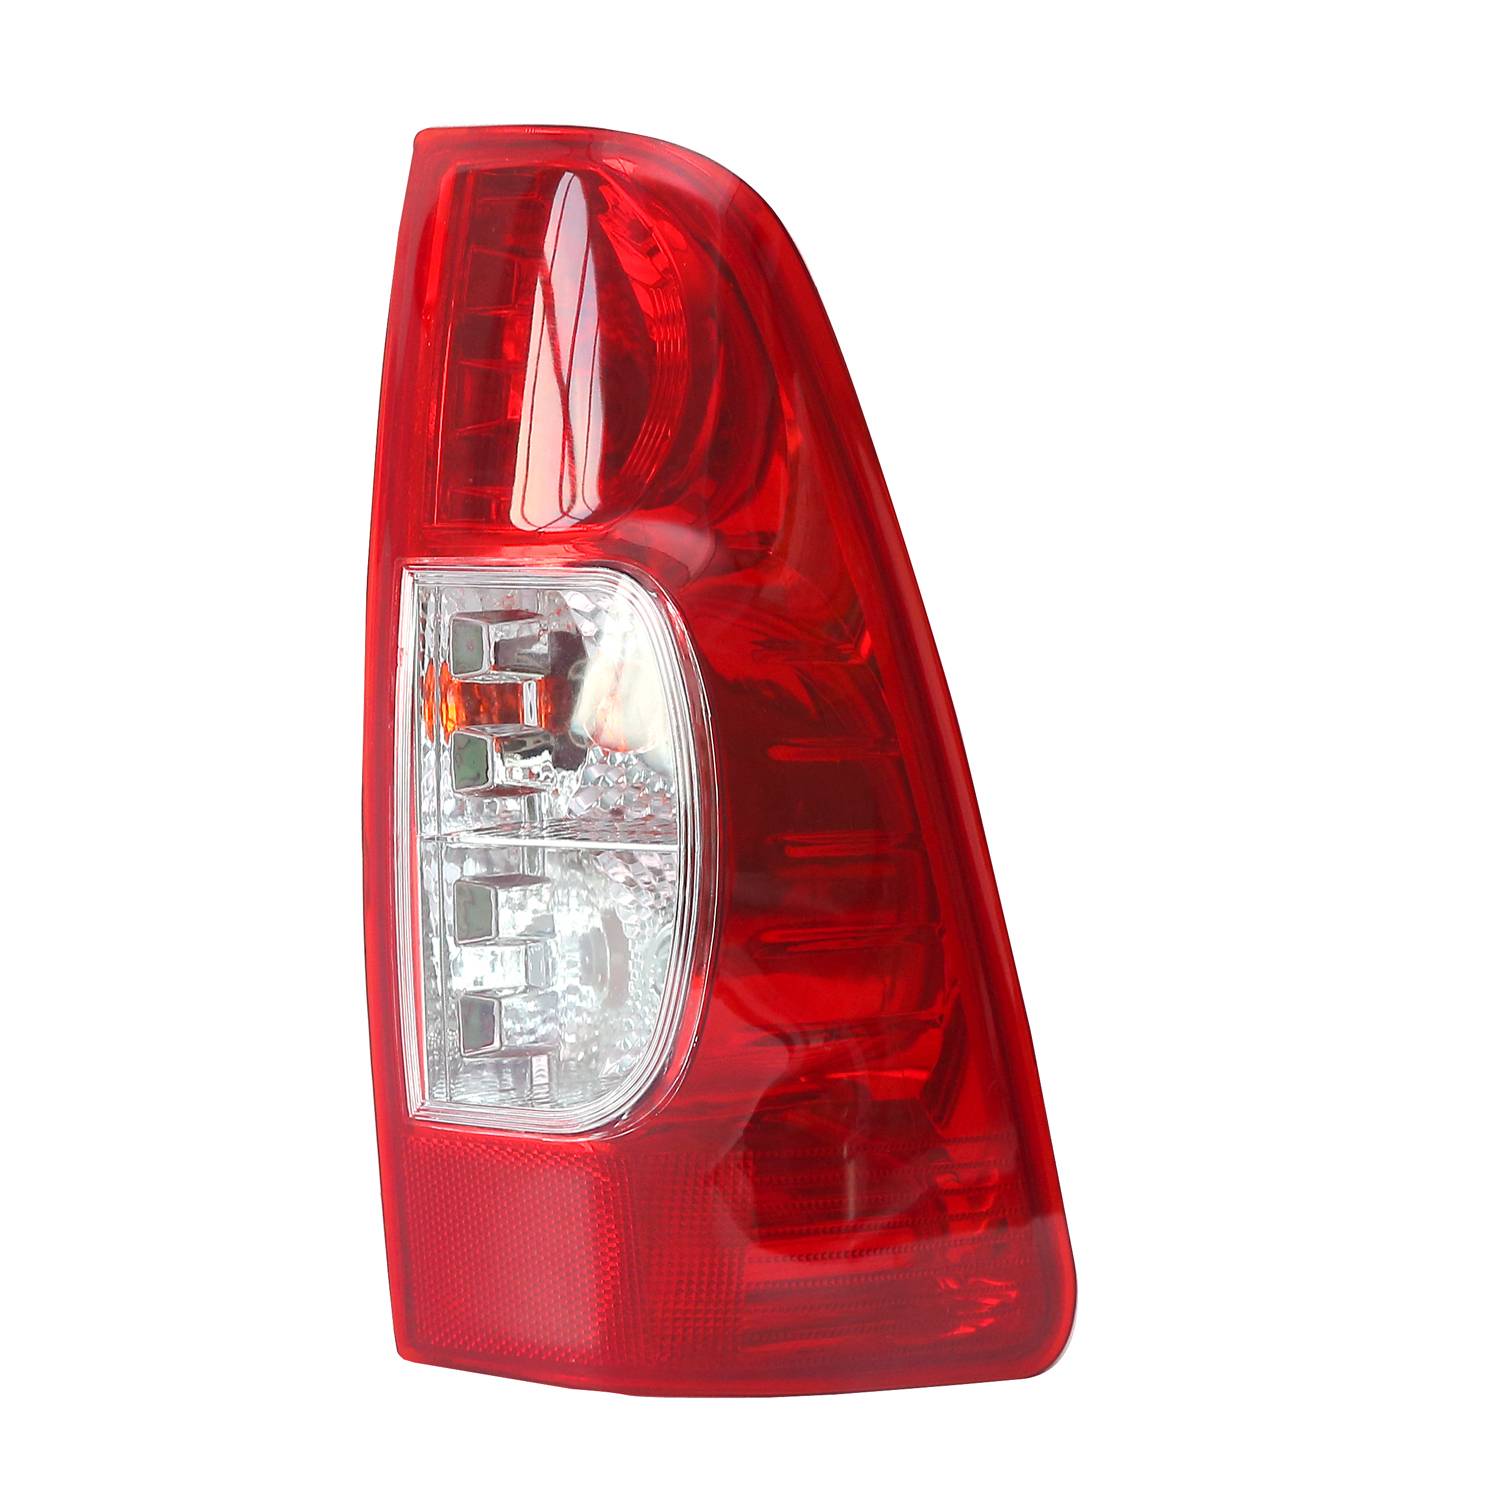 Tail Lamp Assy Bright Red Model Parking Rear Lamp with OE 8973746662 8973746652 for Isuzu D-Max Dmax 2007-2011